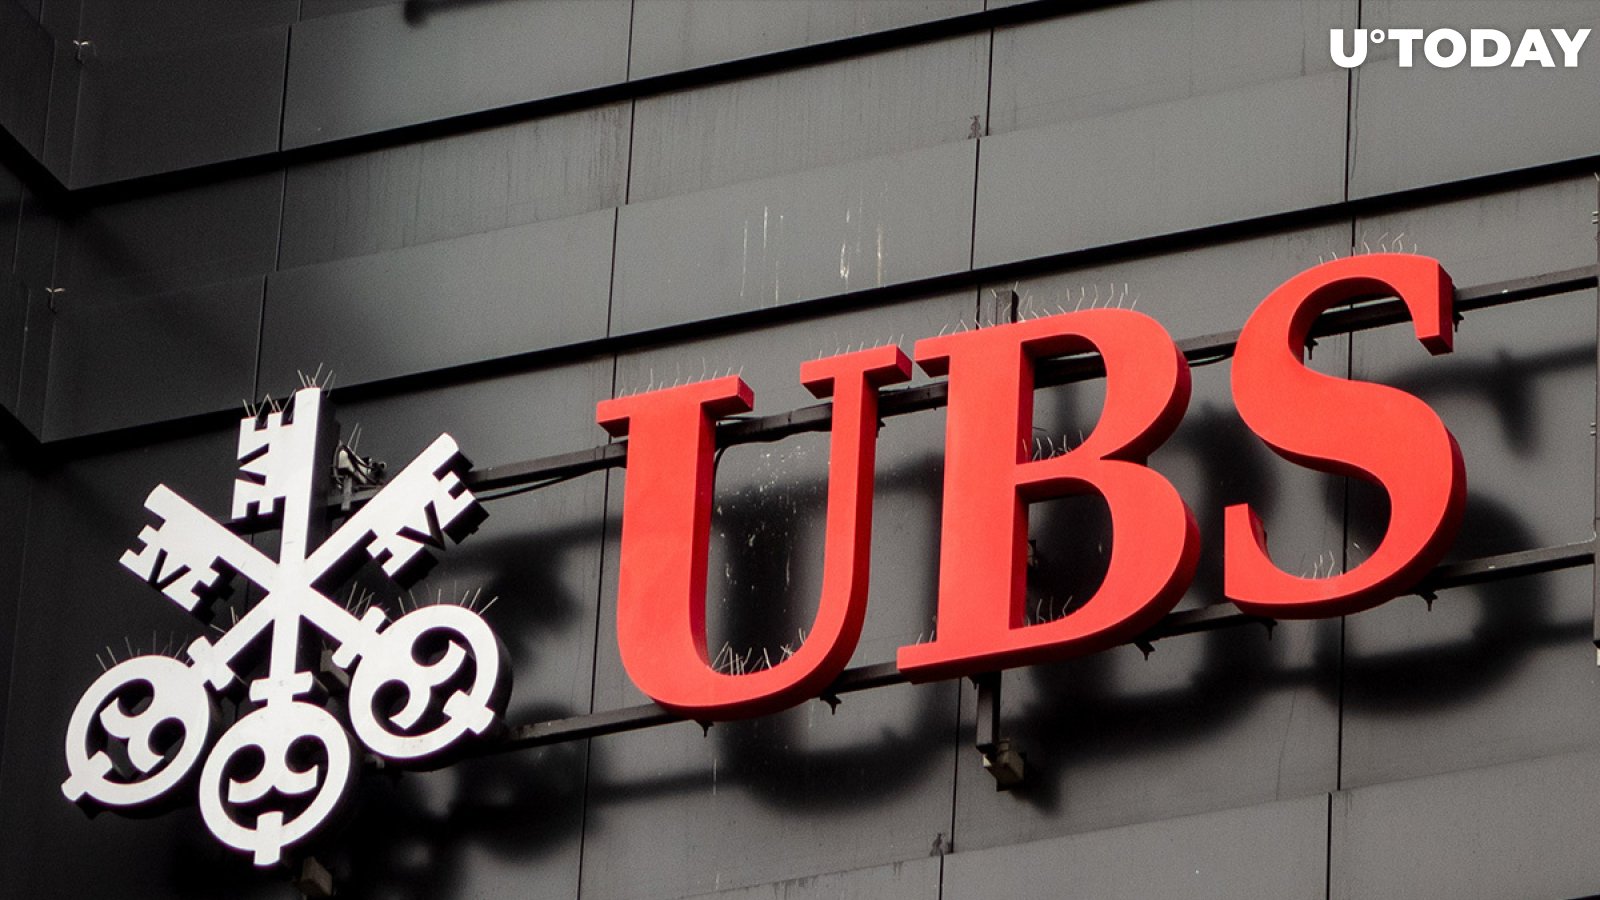 Swiss Banking Giant UBS Jumps on Bitcoin ETF Train